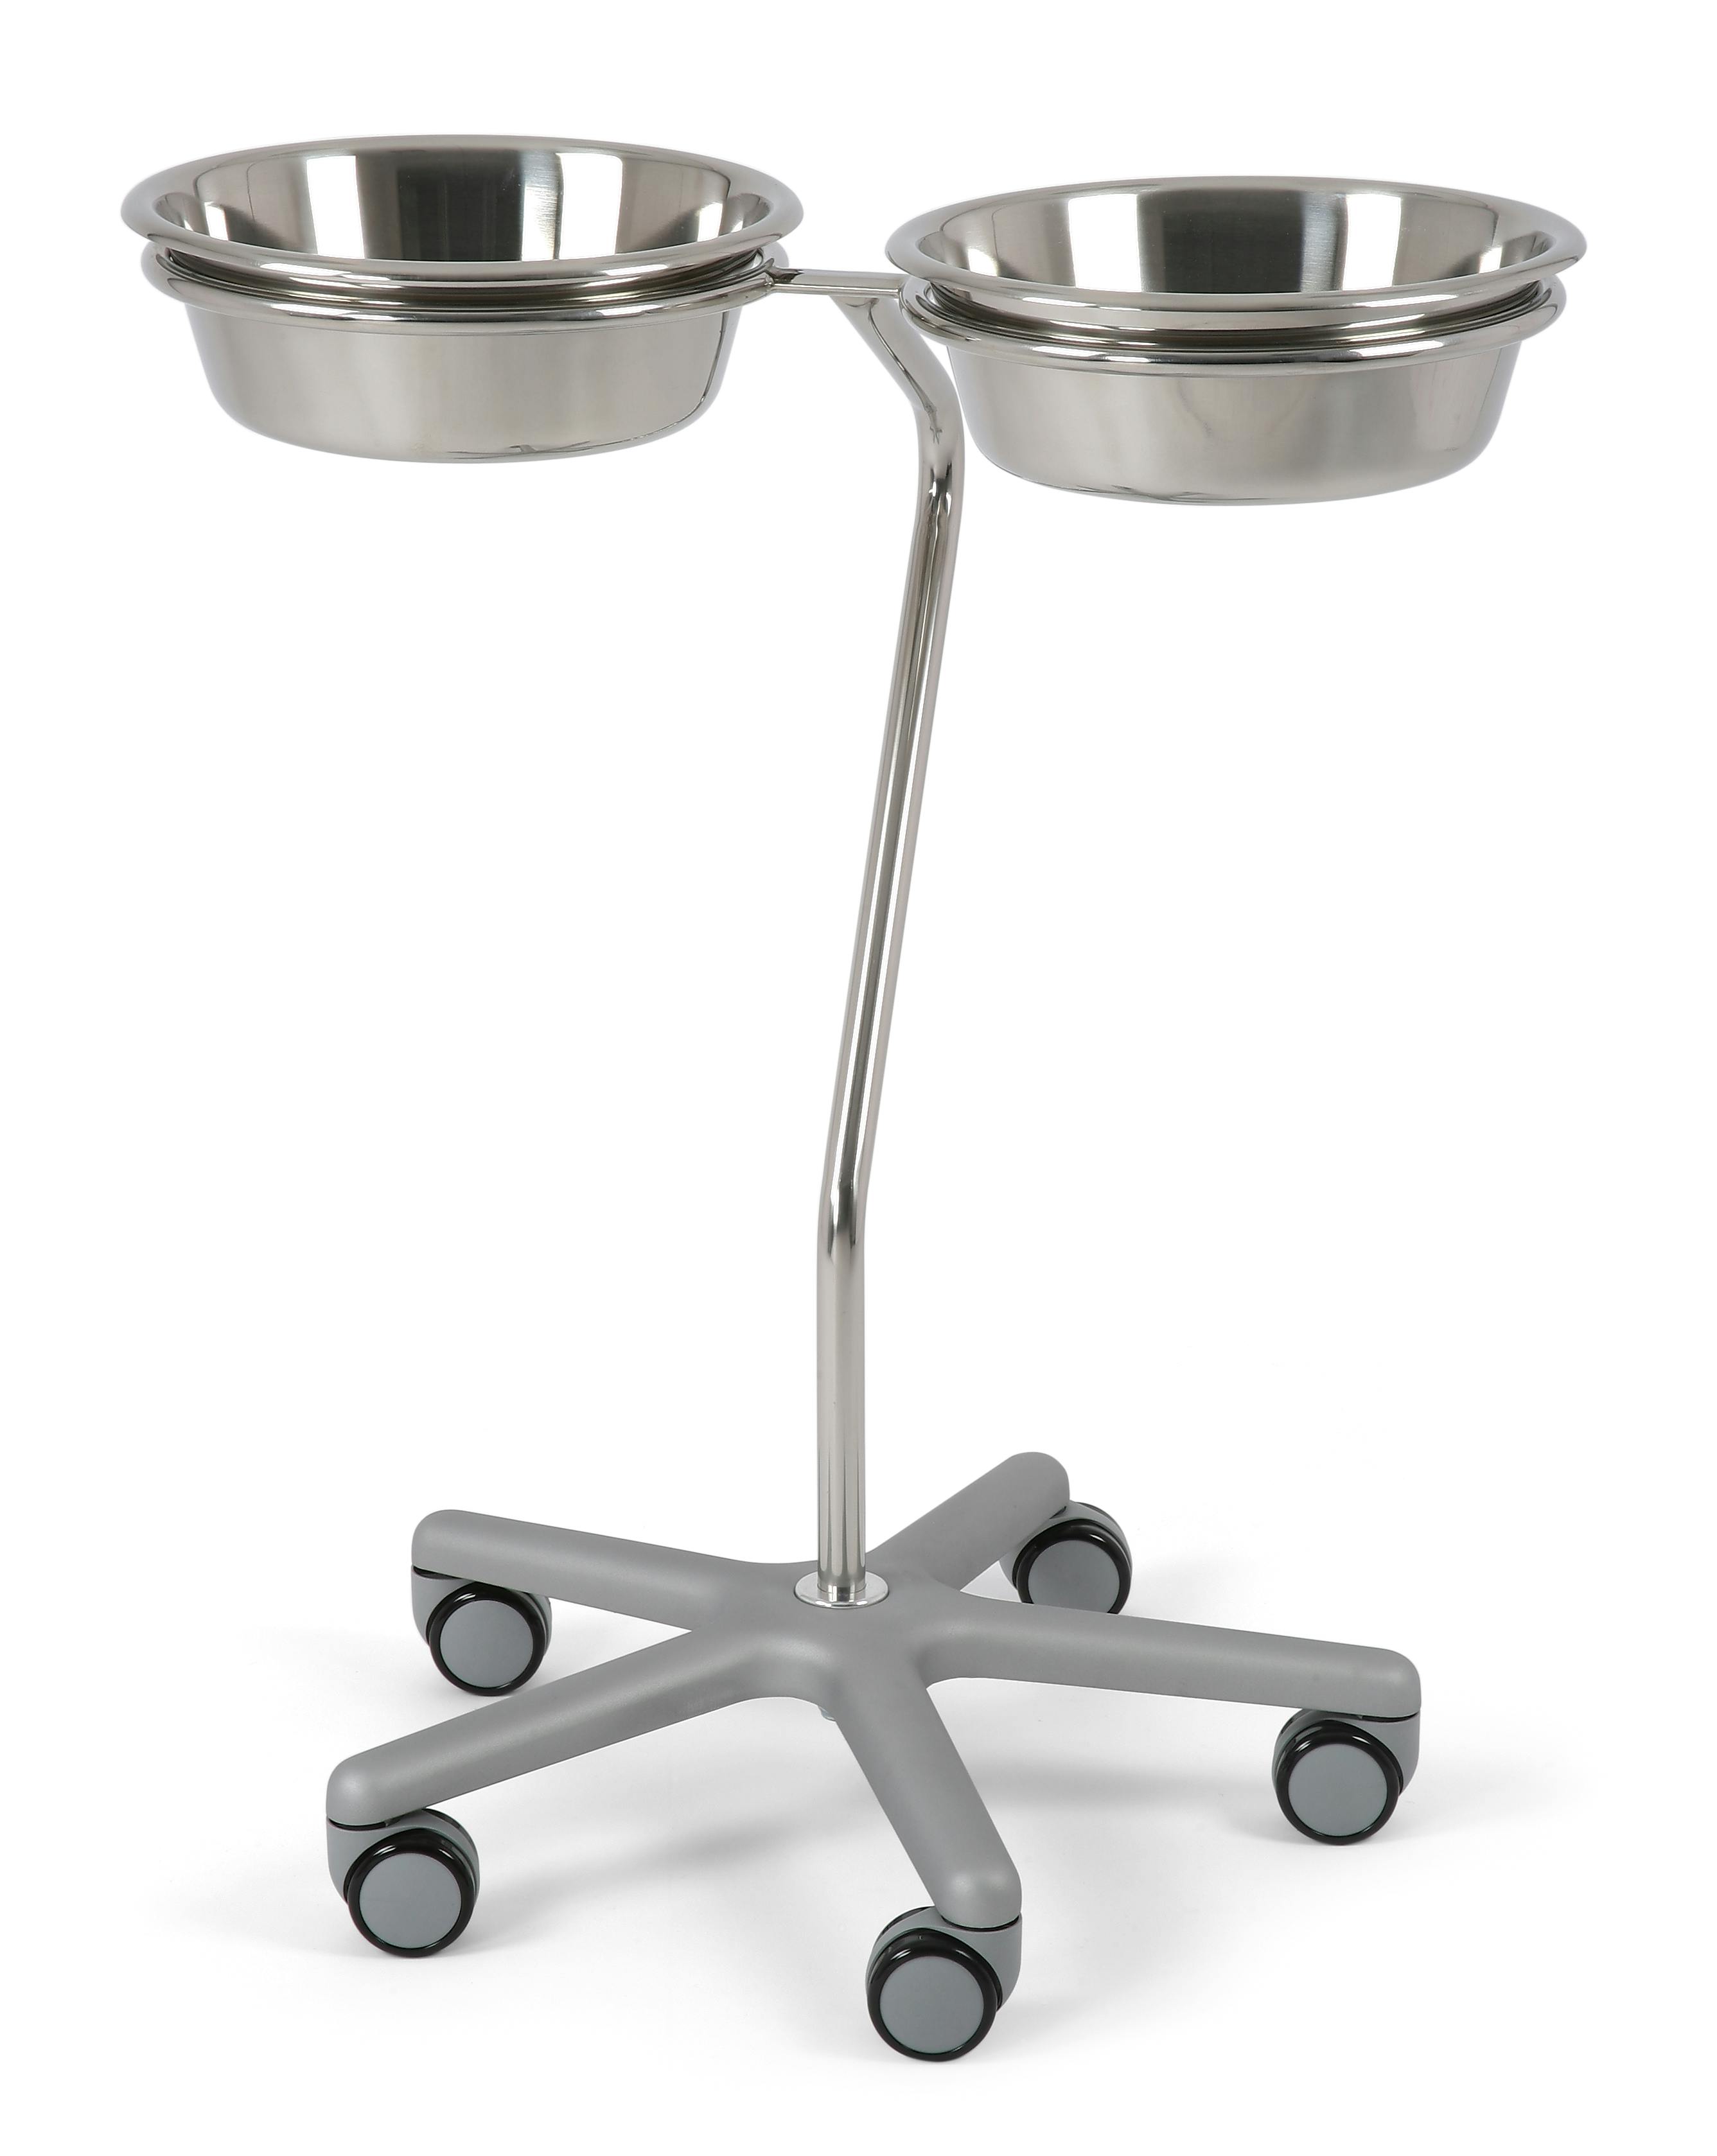 Bowl Stand - Double Bowl - Side by Side Mounted